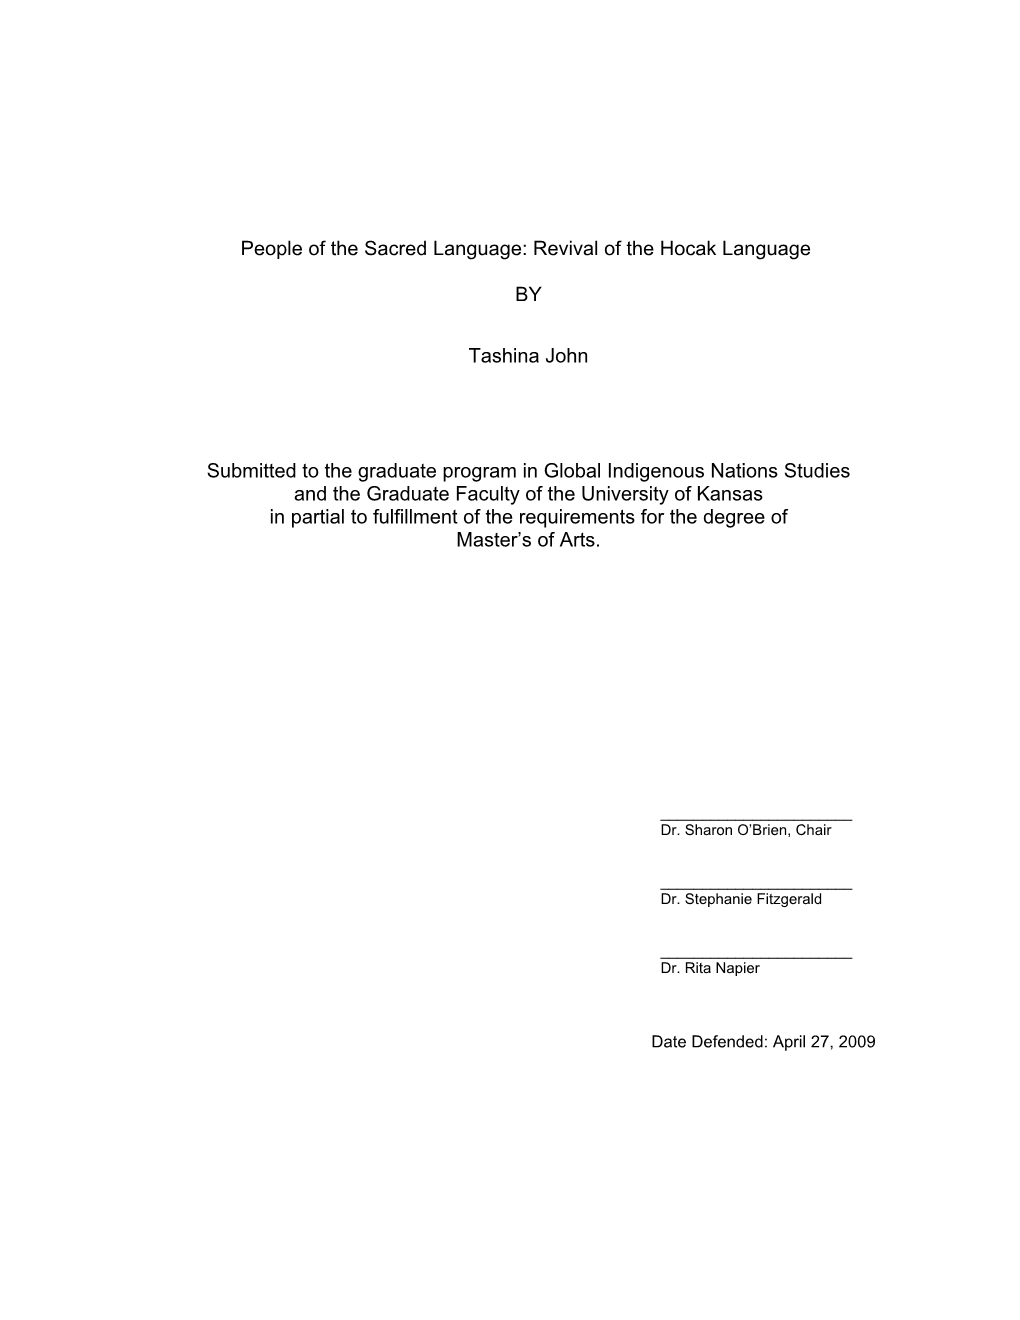 Revival of the Hocak Language by Tashina John Submitted to the Graduate Program in Global Indigen